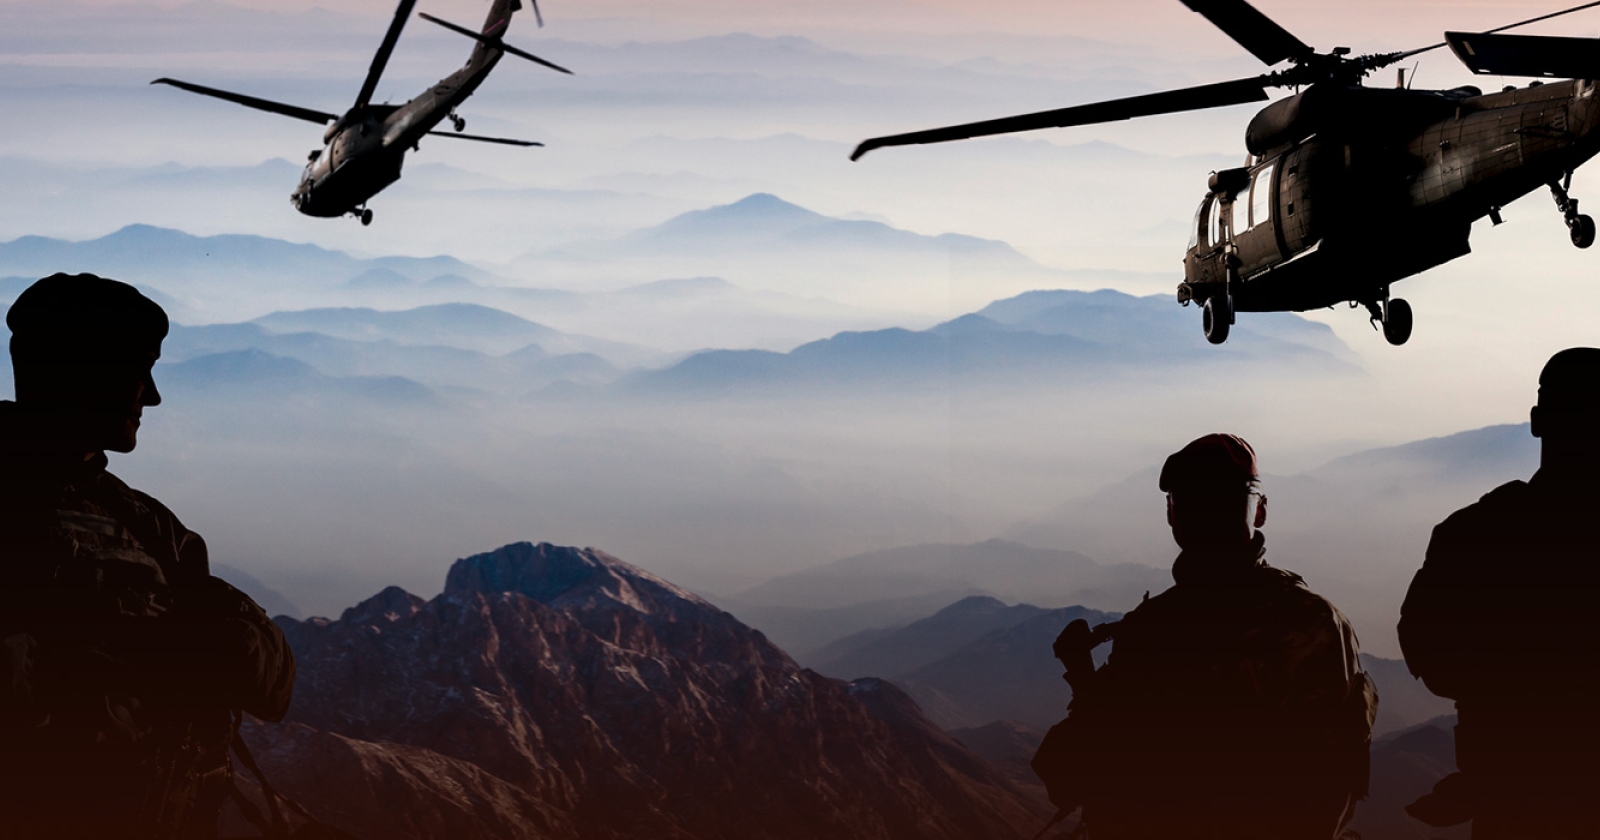 Military personnel in the mountains with helicopters flying above. We help industries leverage technology.